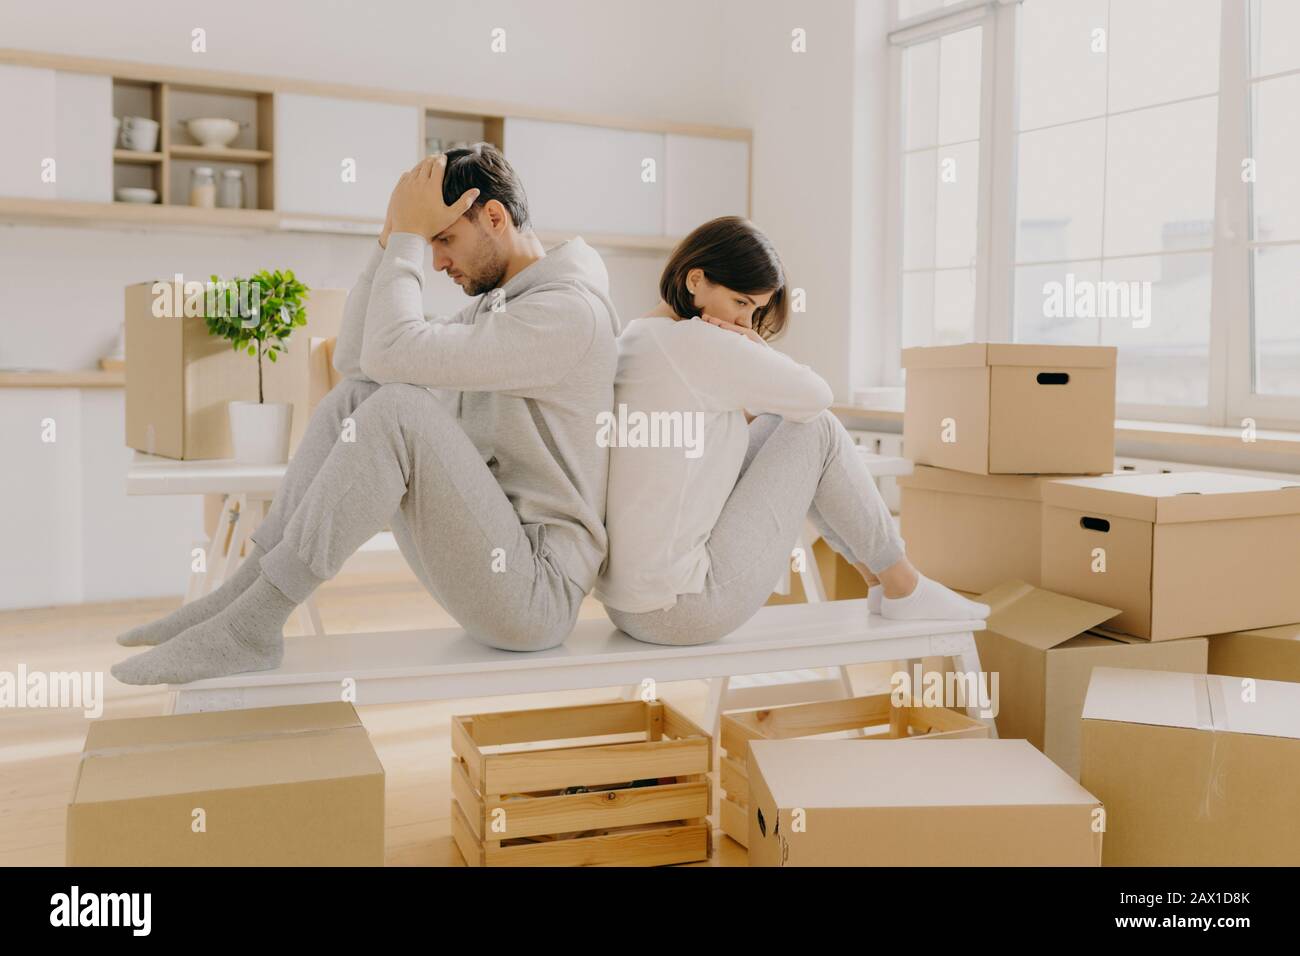 Unhappy young married woman and man have to leave house, move in other place, sit back to each other pose in empty room with stack of boxes, wear dome Stock Photo